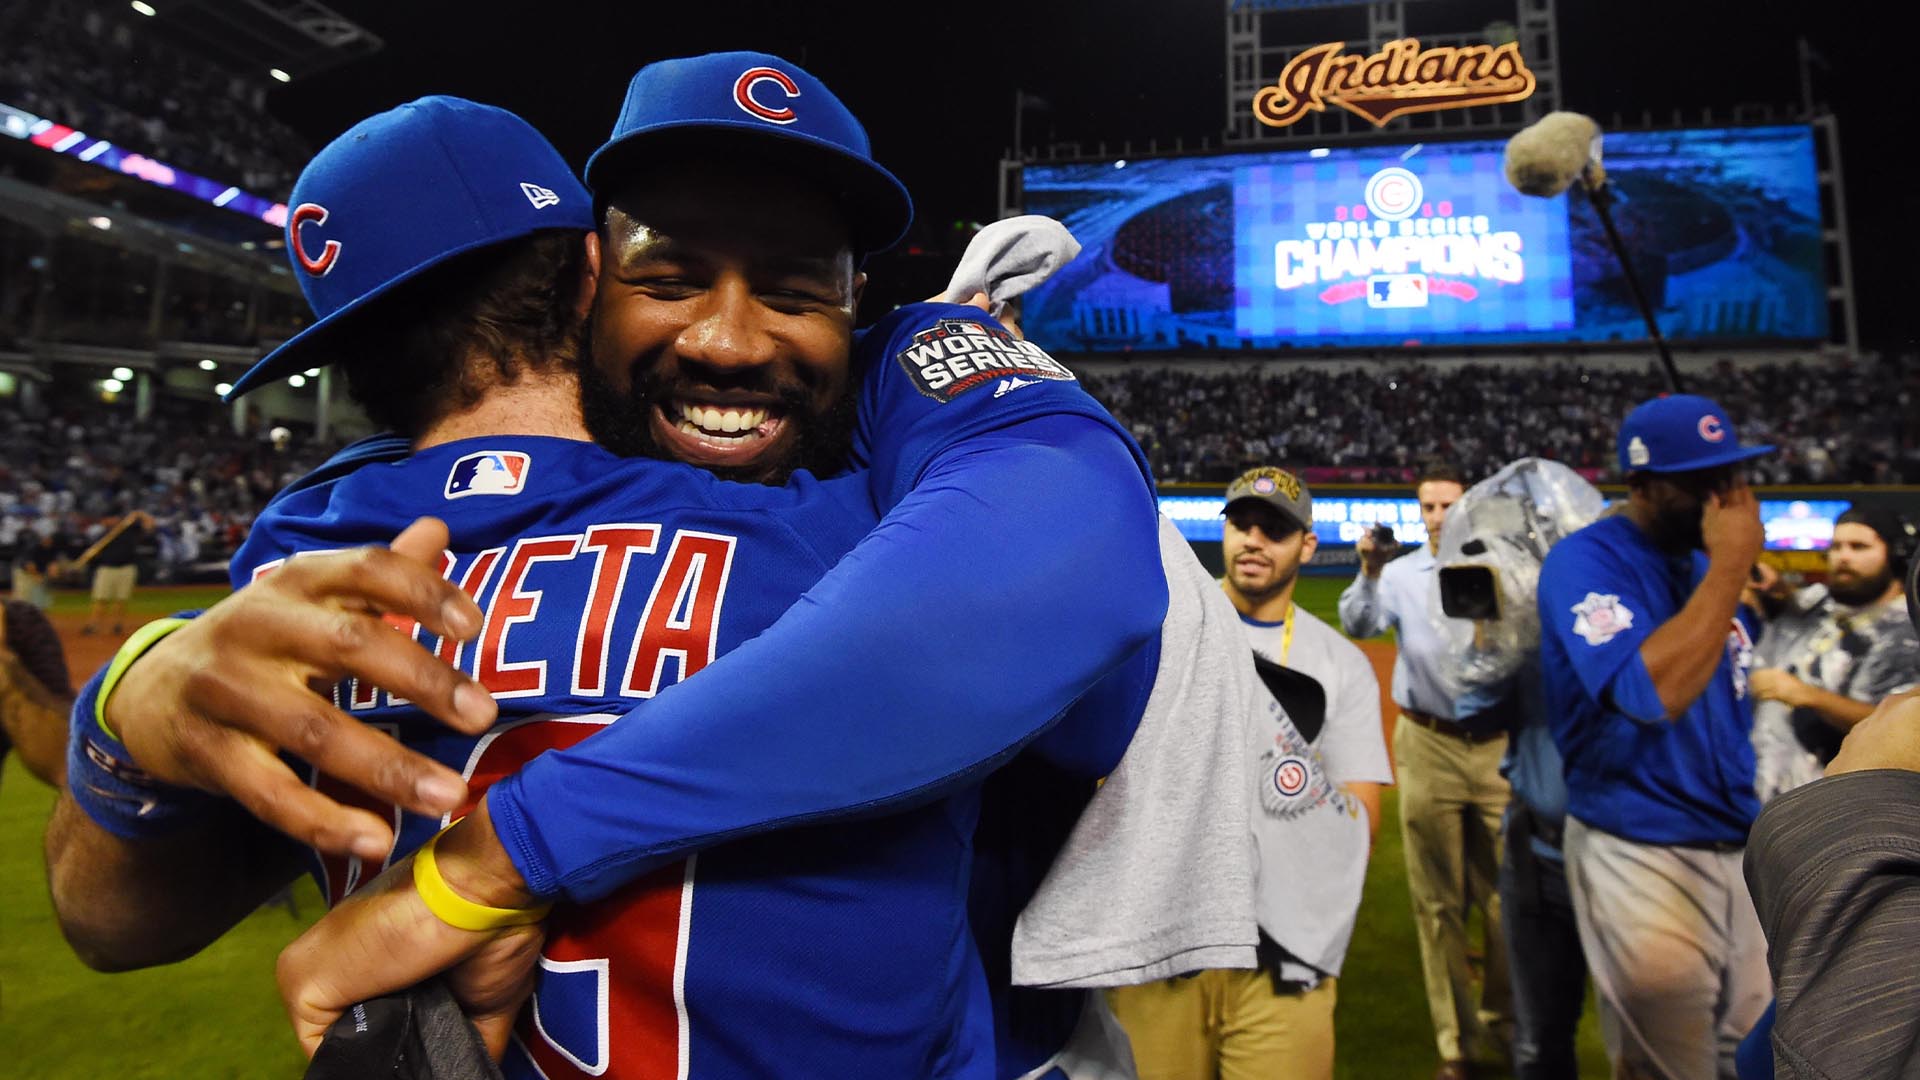 Jason Heyward knows his impact on Cubs: 'What I bring wins